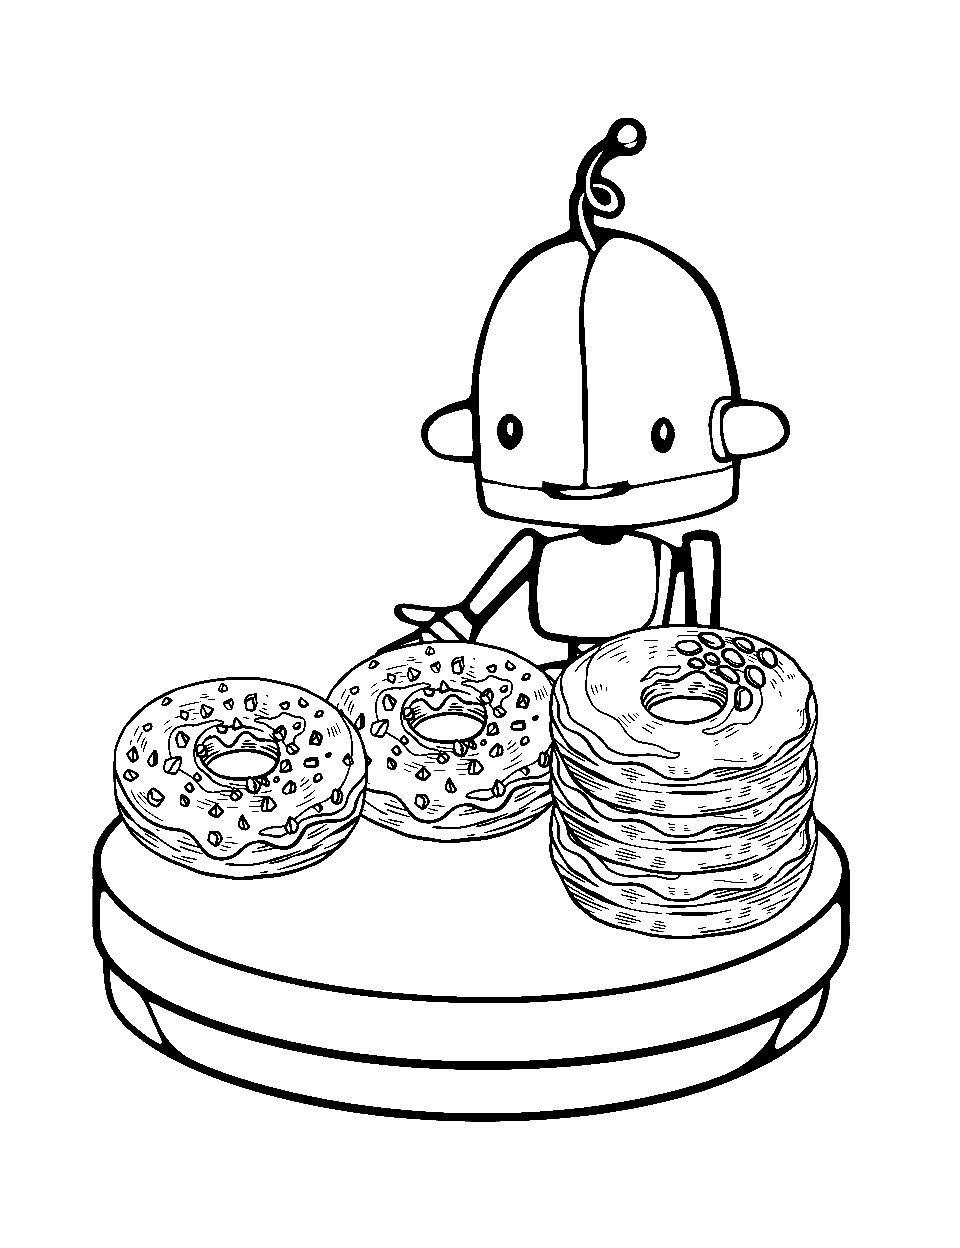 Robot Making Donuts Donut Coloring Page - A futuristic robot assembling donuts.